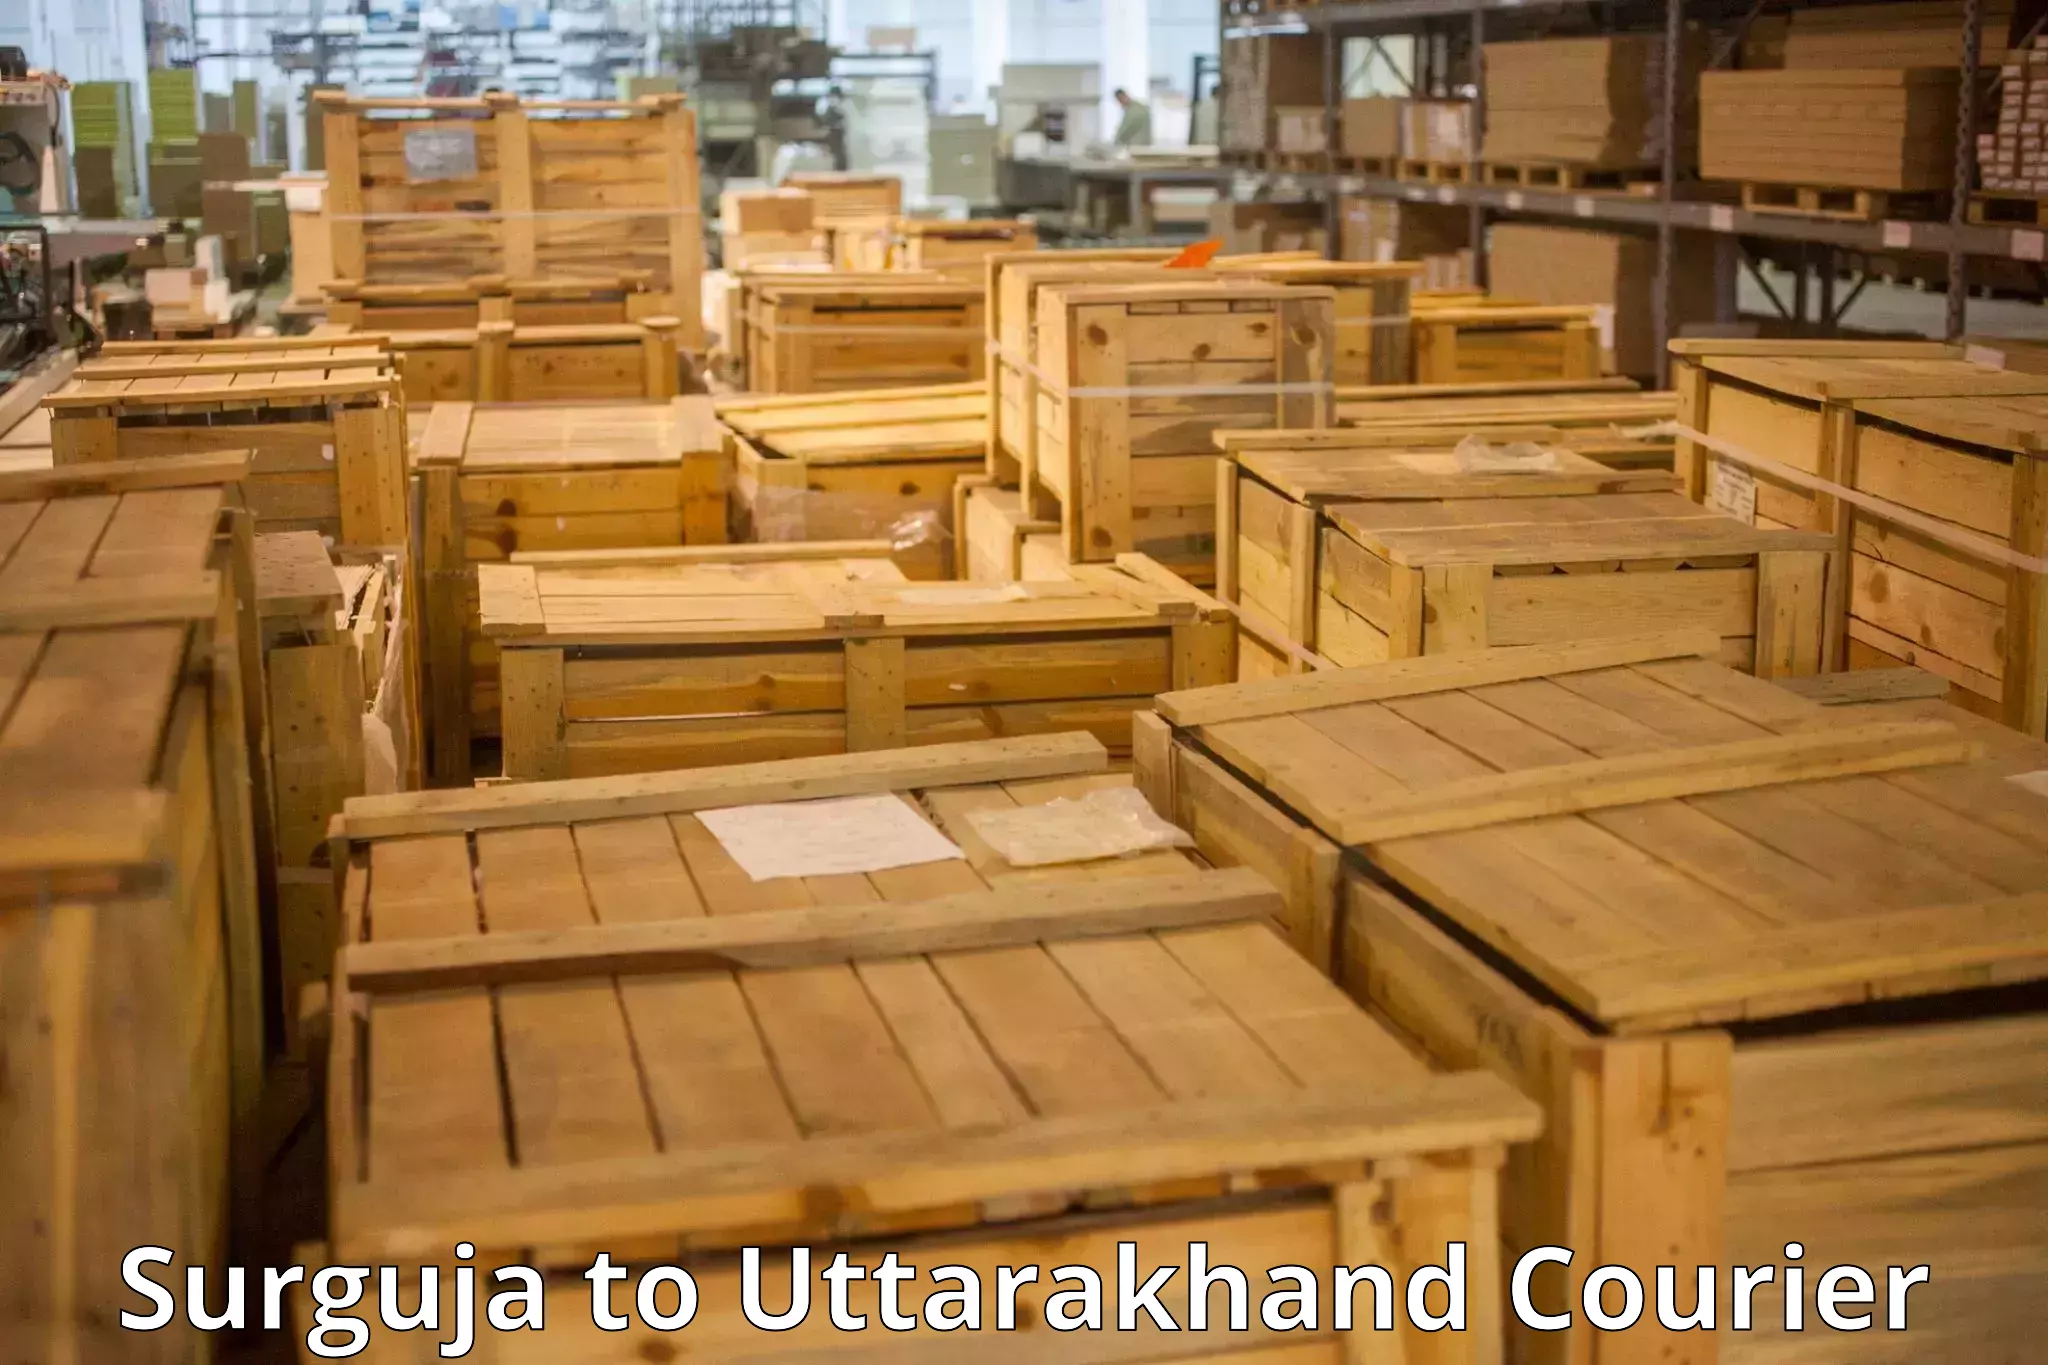 Baggage shipping experience Surguja to Tehri Garhwal